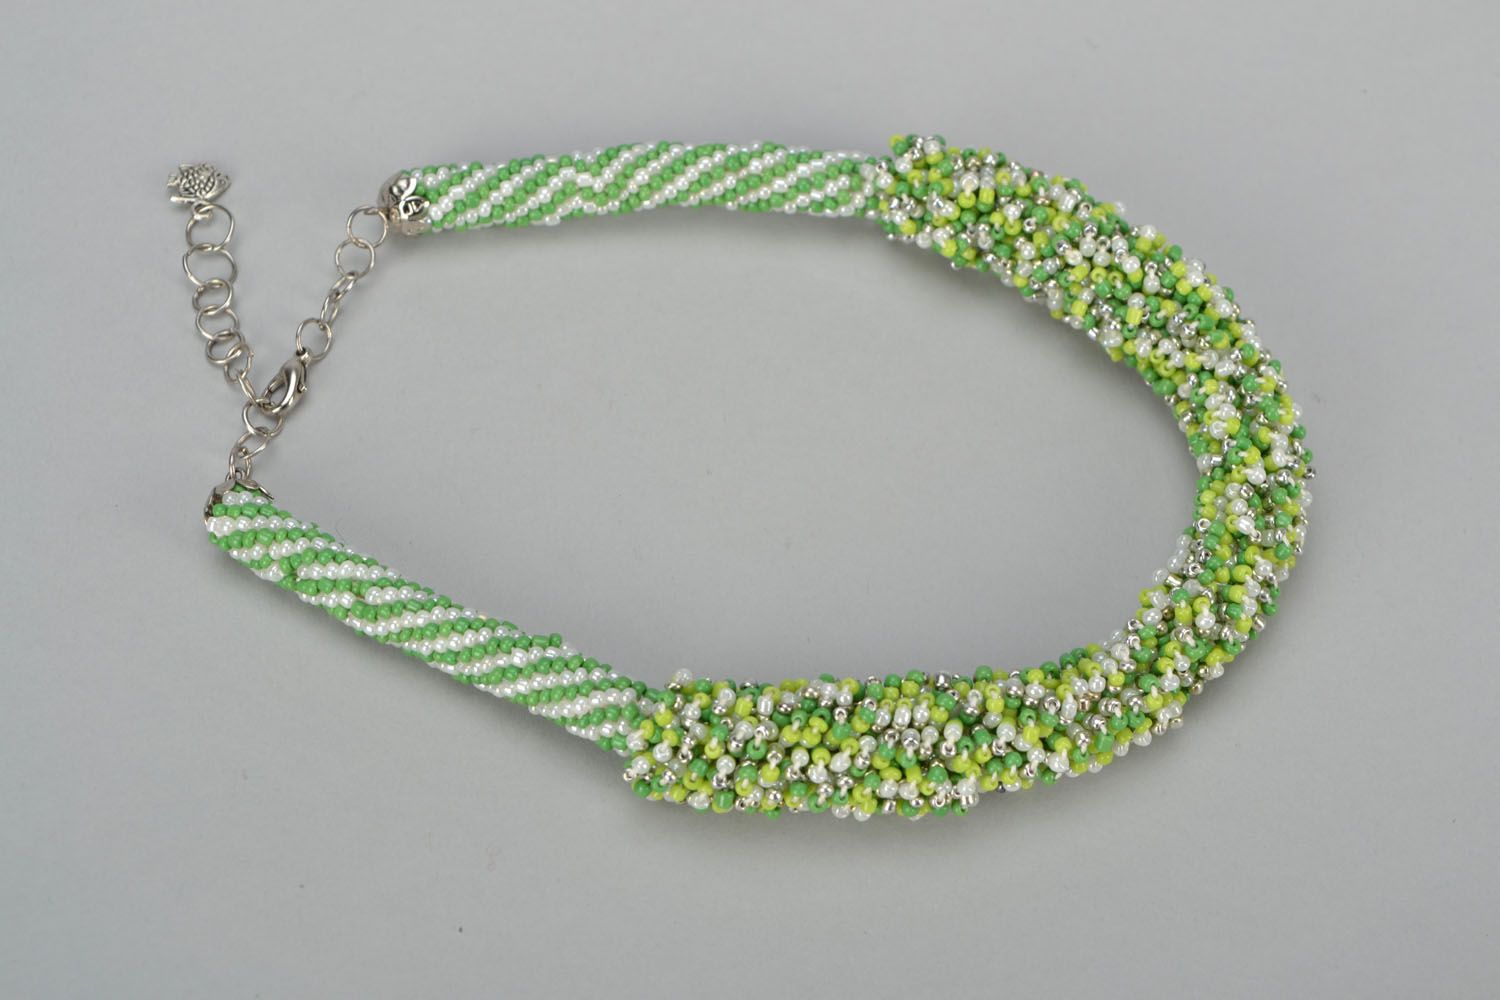 Homemade beaded cord necklace photo 2